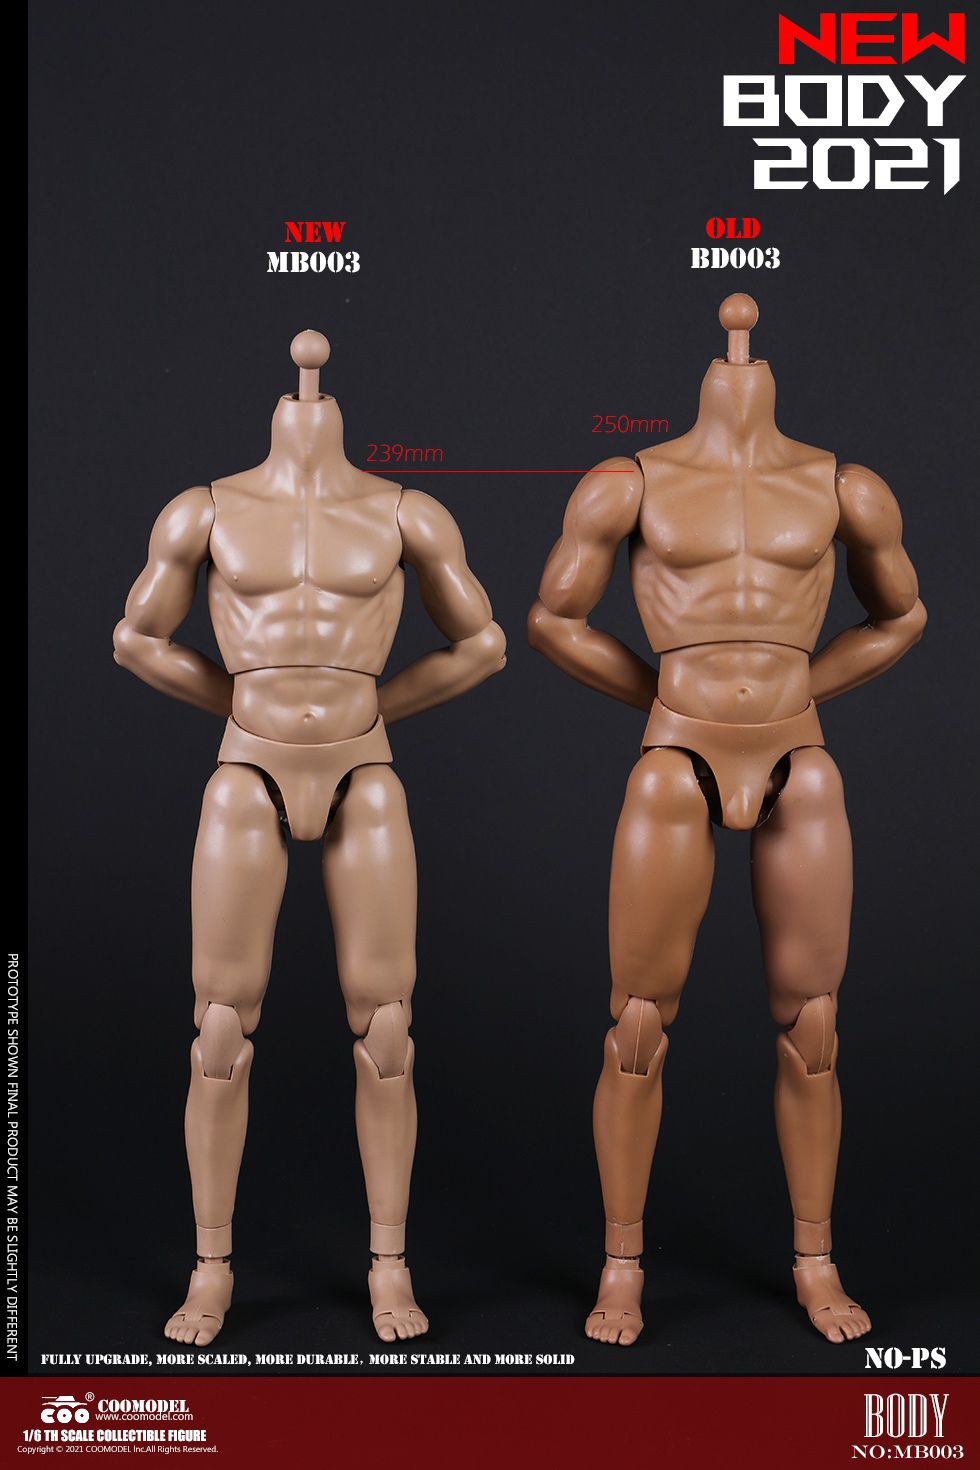 NEW PRODUCT: COOMODEL: 1/6 MB001 standard male body, MB002 tall male body, MB003 muscle male body, MB004 tall muscle body 18100310